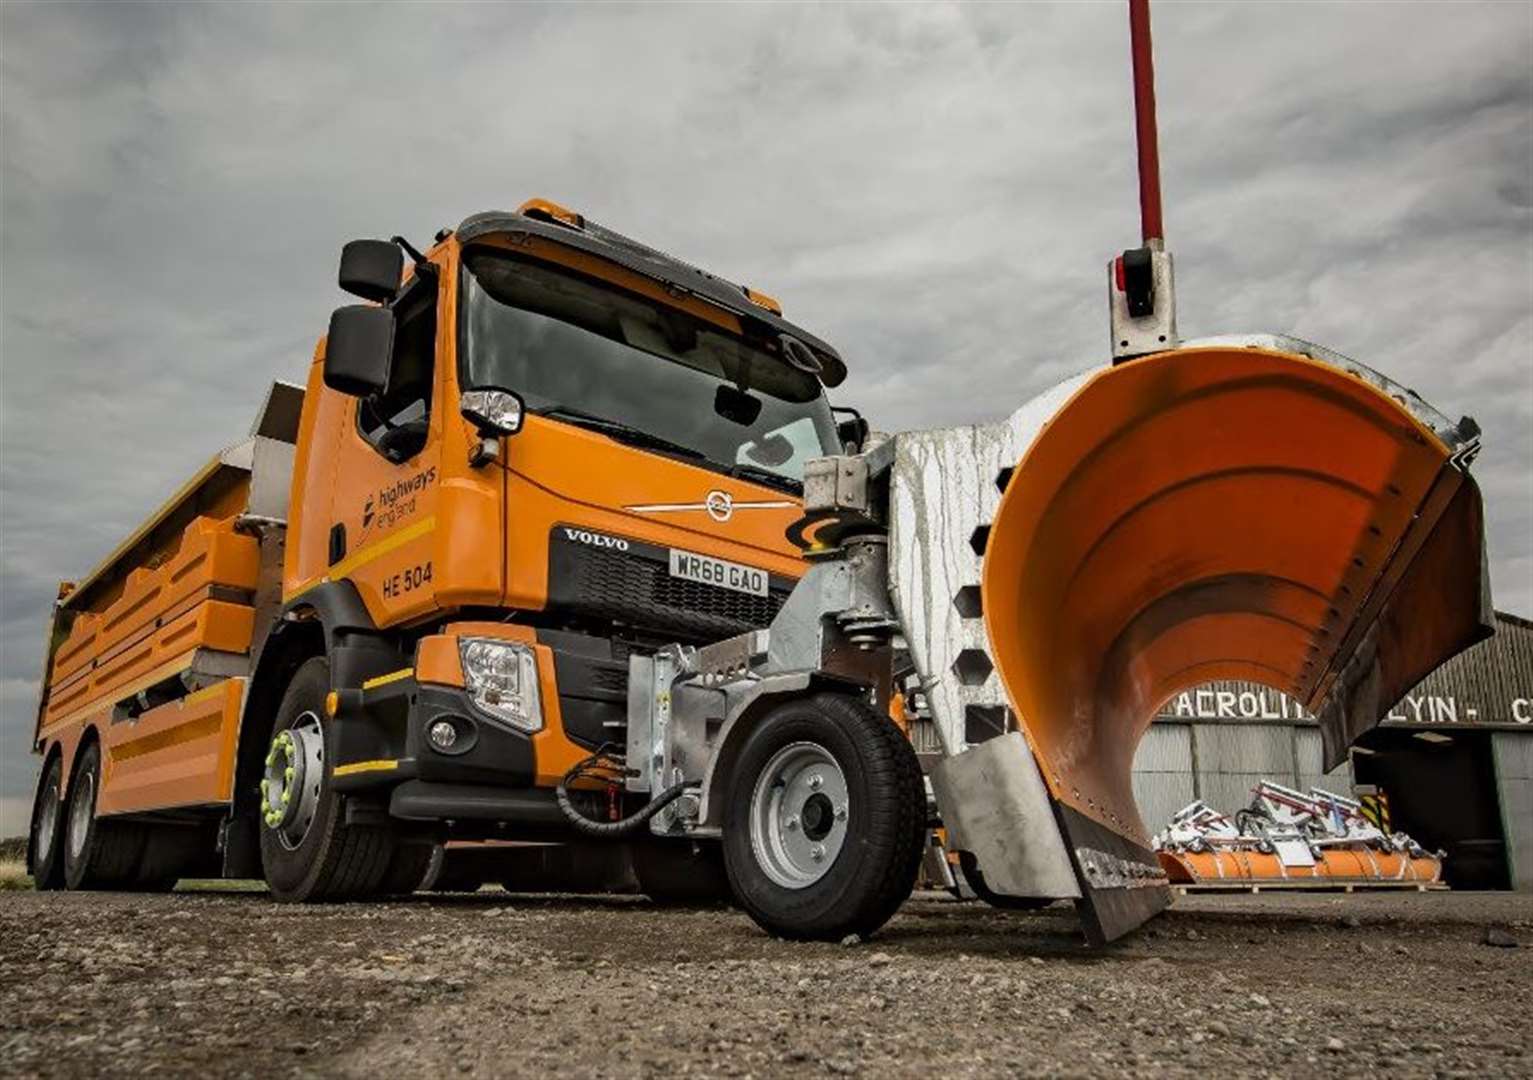 State-of-the-art gritters announced for Kent